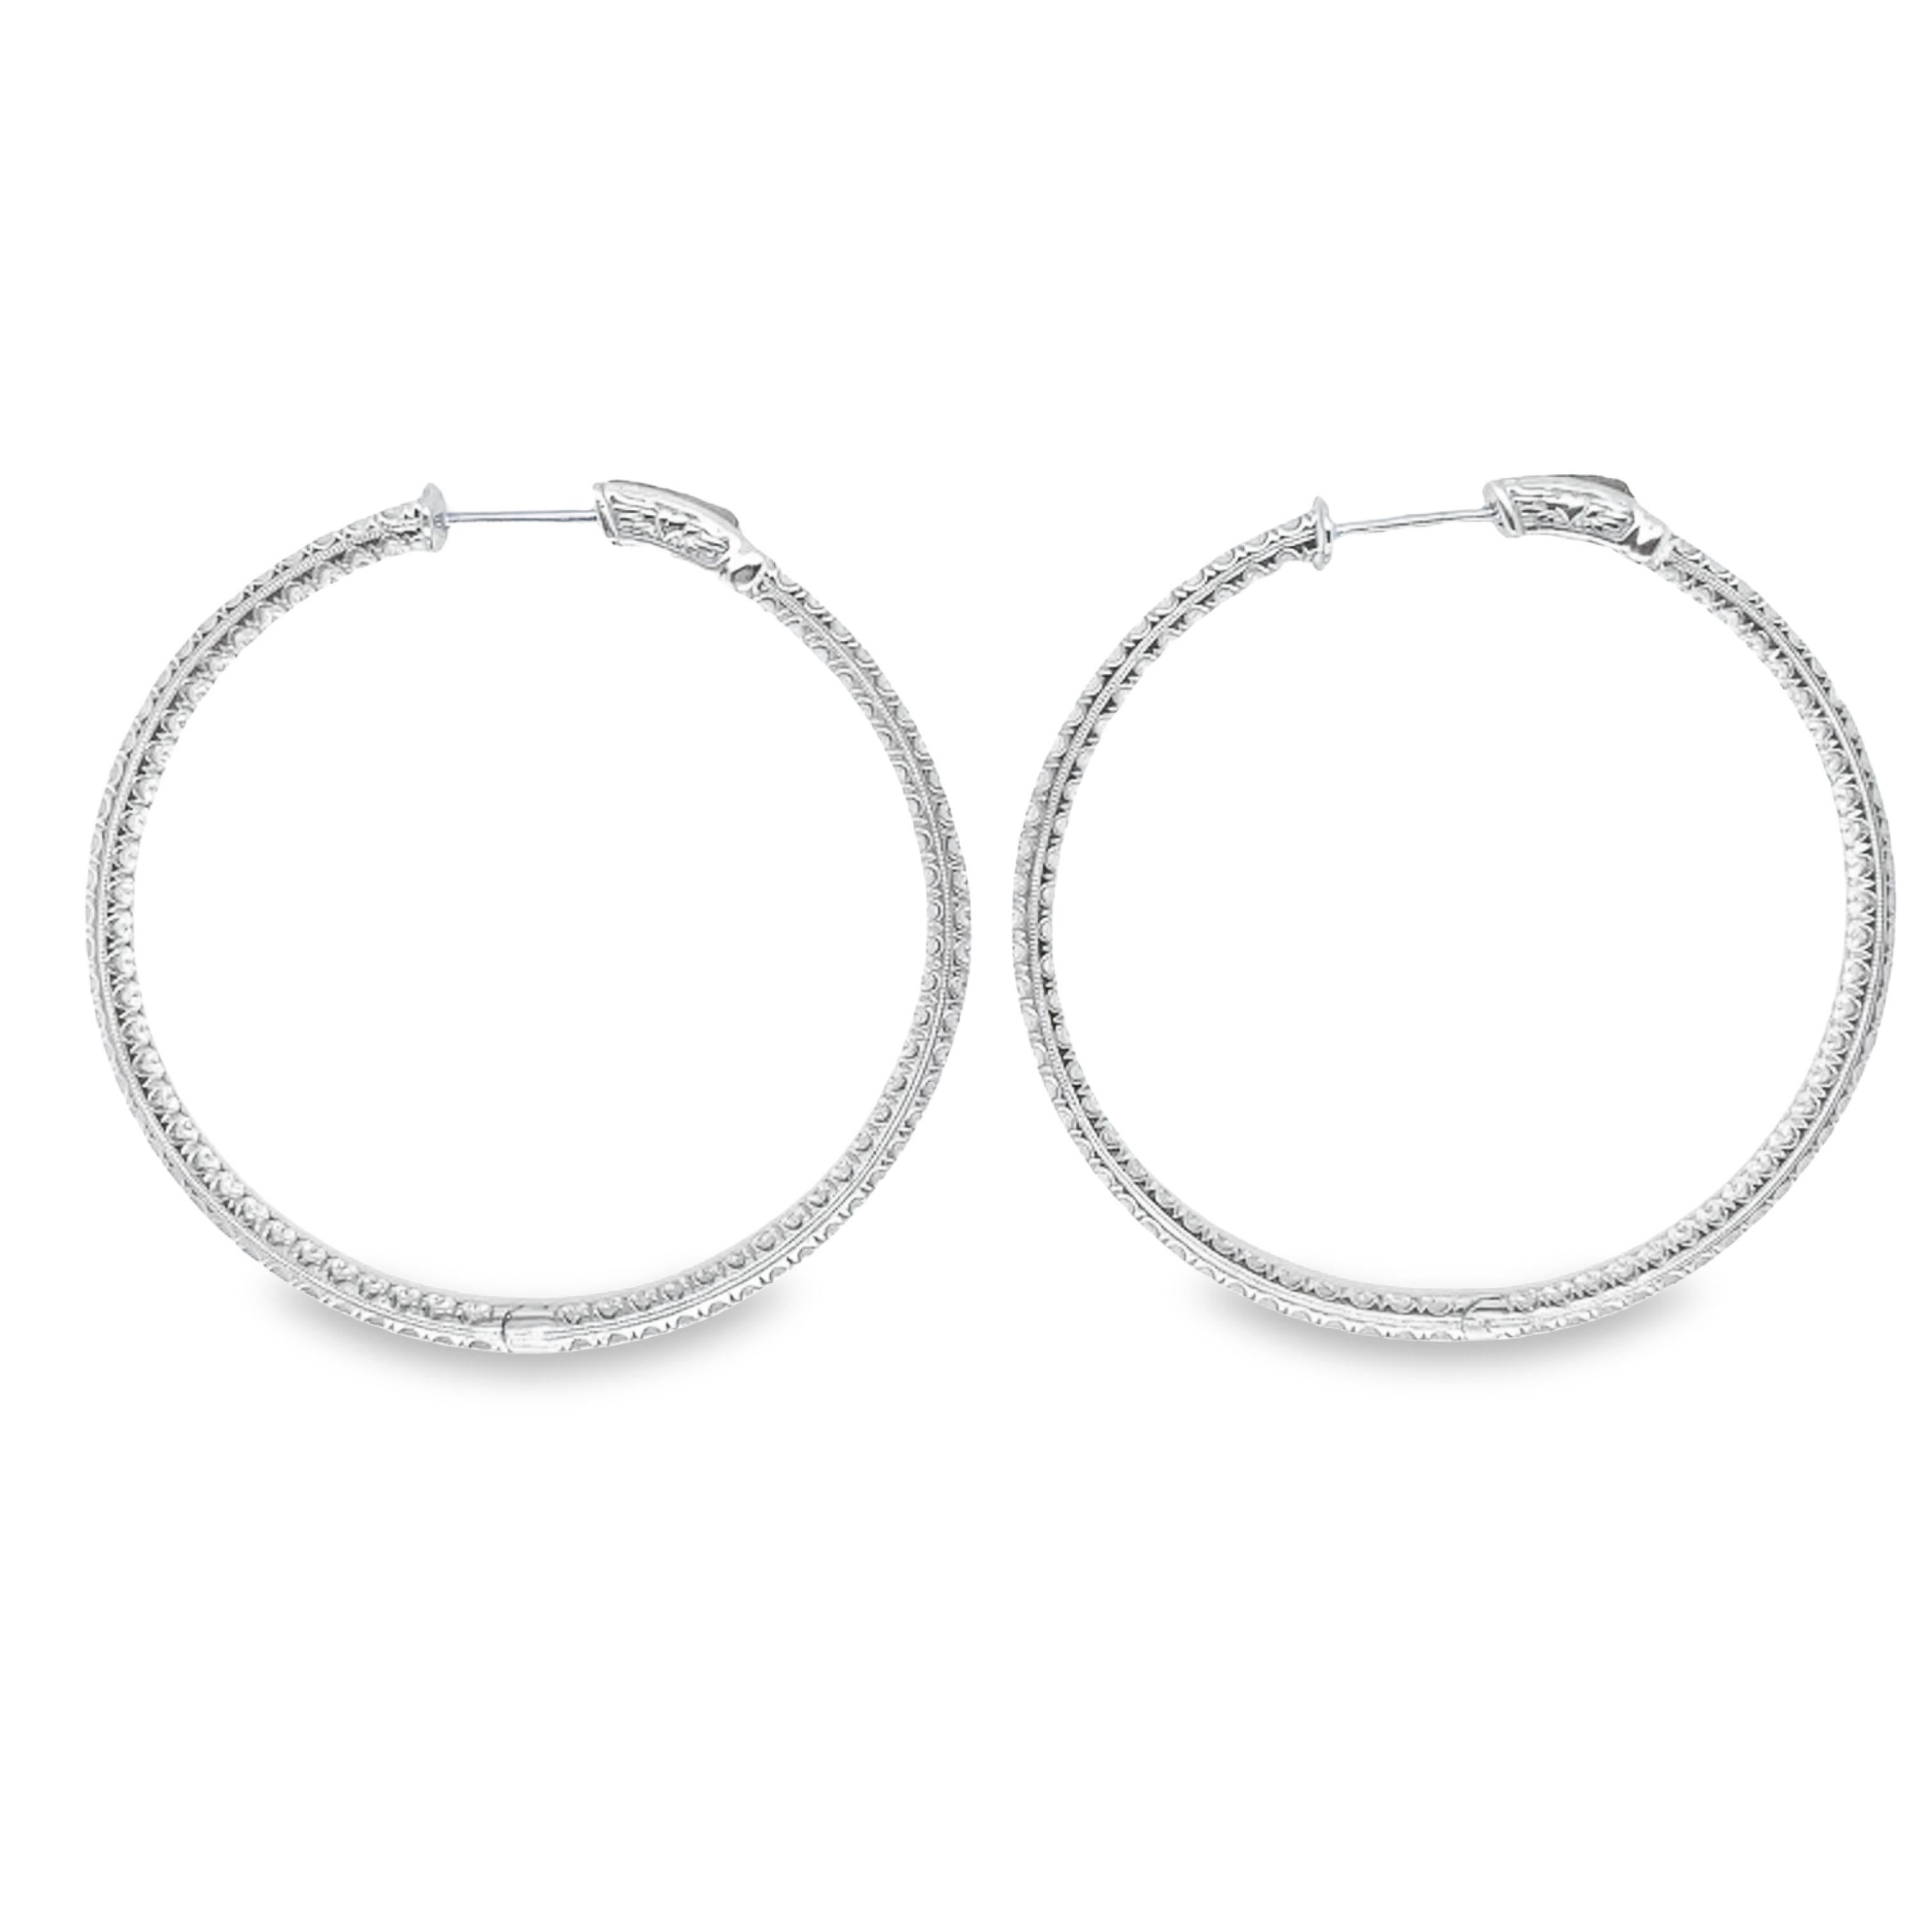 Round Cut Gems Are Forever 5 carat Diamond Inside-Out Hoop Earrings in 18k Gold For Sale